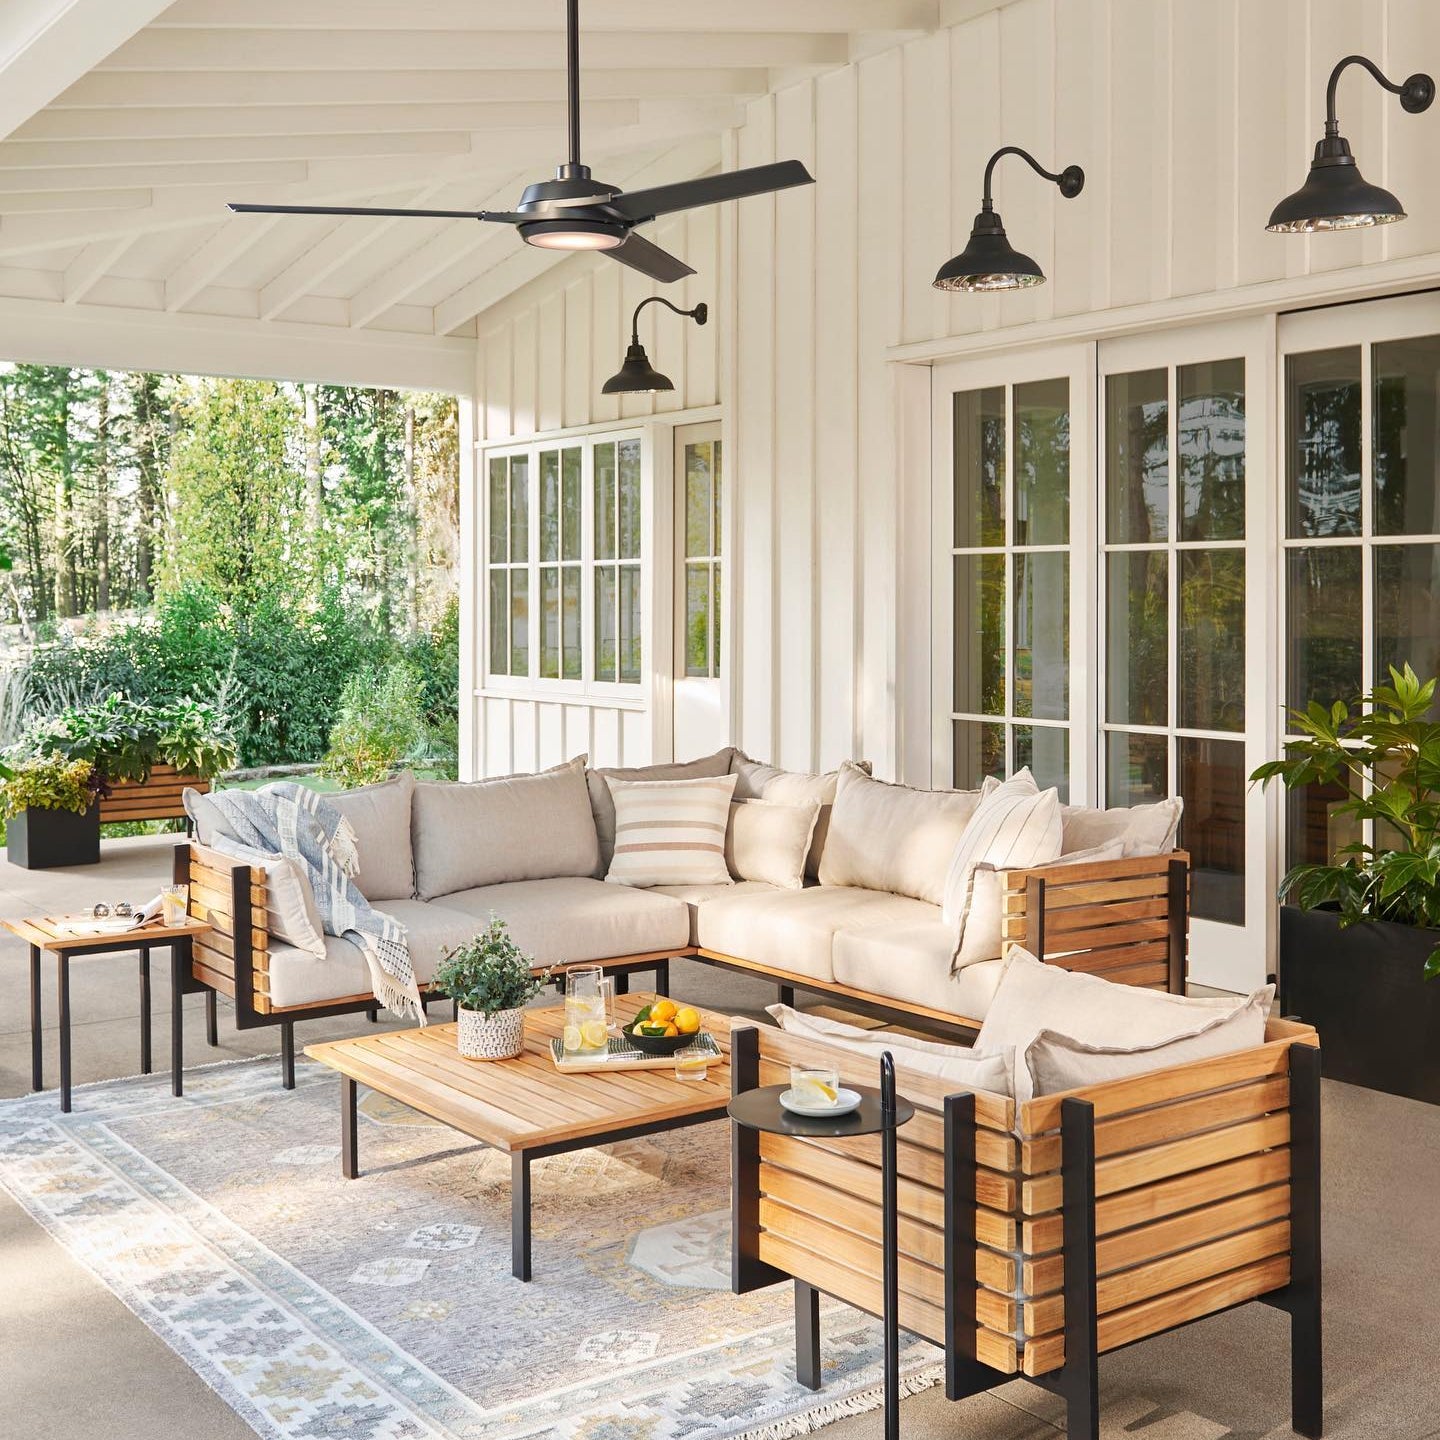 19 Outdoor Living Room Ideas Perfect for Relaxing Summer Nights